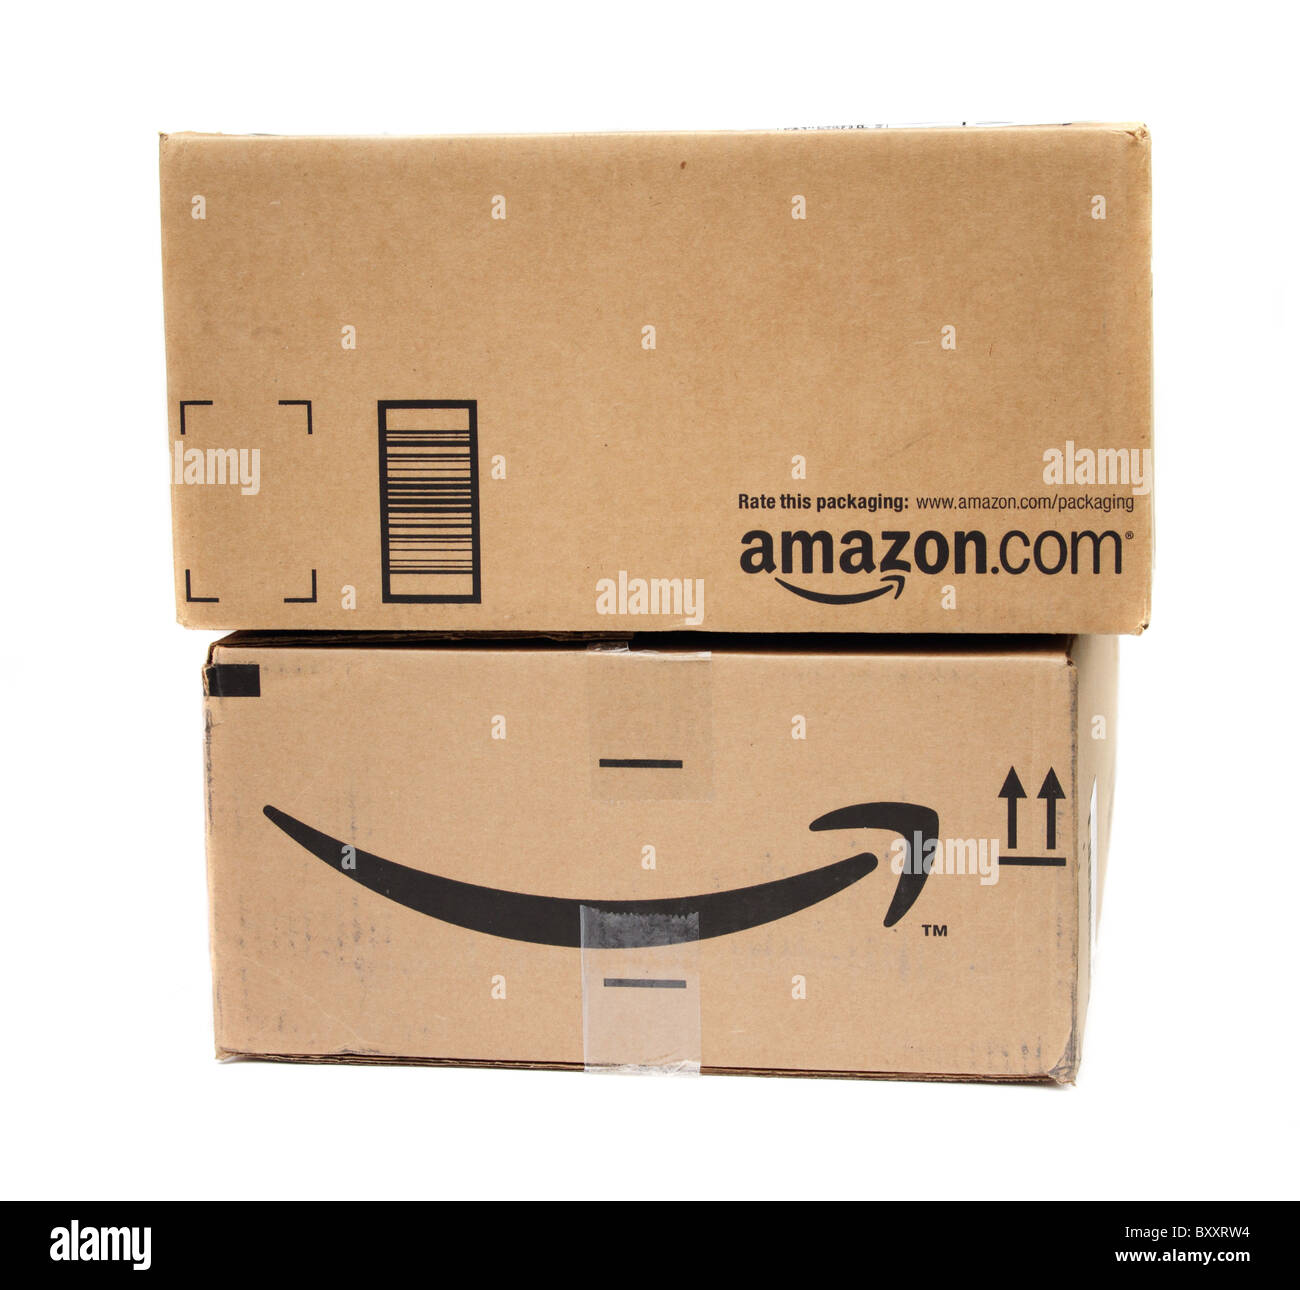 Amazon.com shipping boxes with brand name and smile logo Stock Photo - Alamy